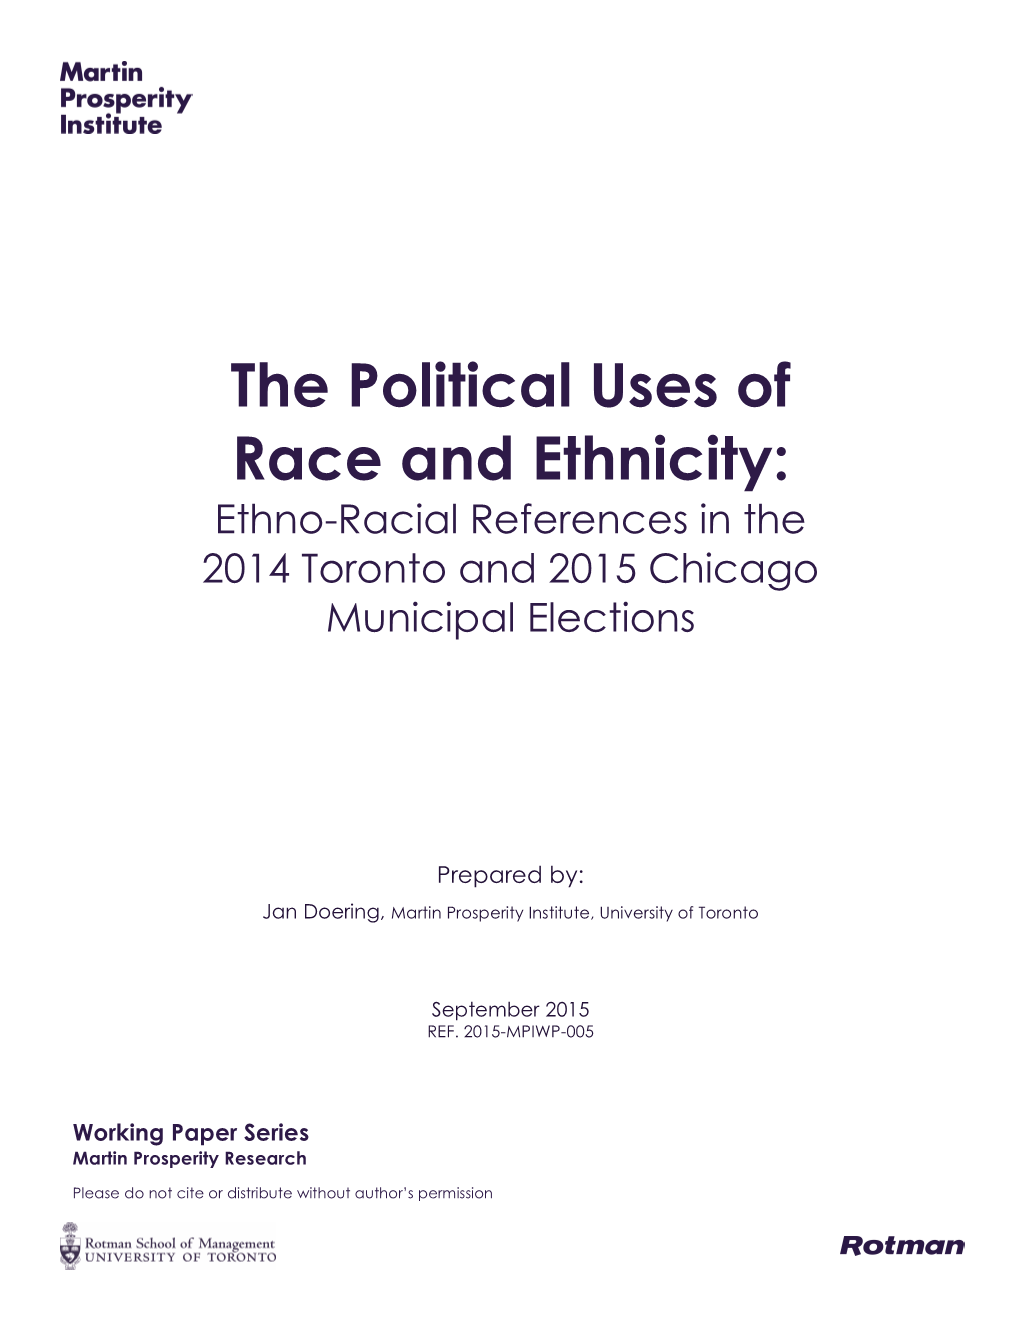 The Political Uses of Race and Ethnicity: Ethno-Racial References in the 2014 Toronto and 2015 Chicago Municipal Elections